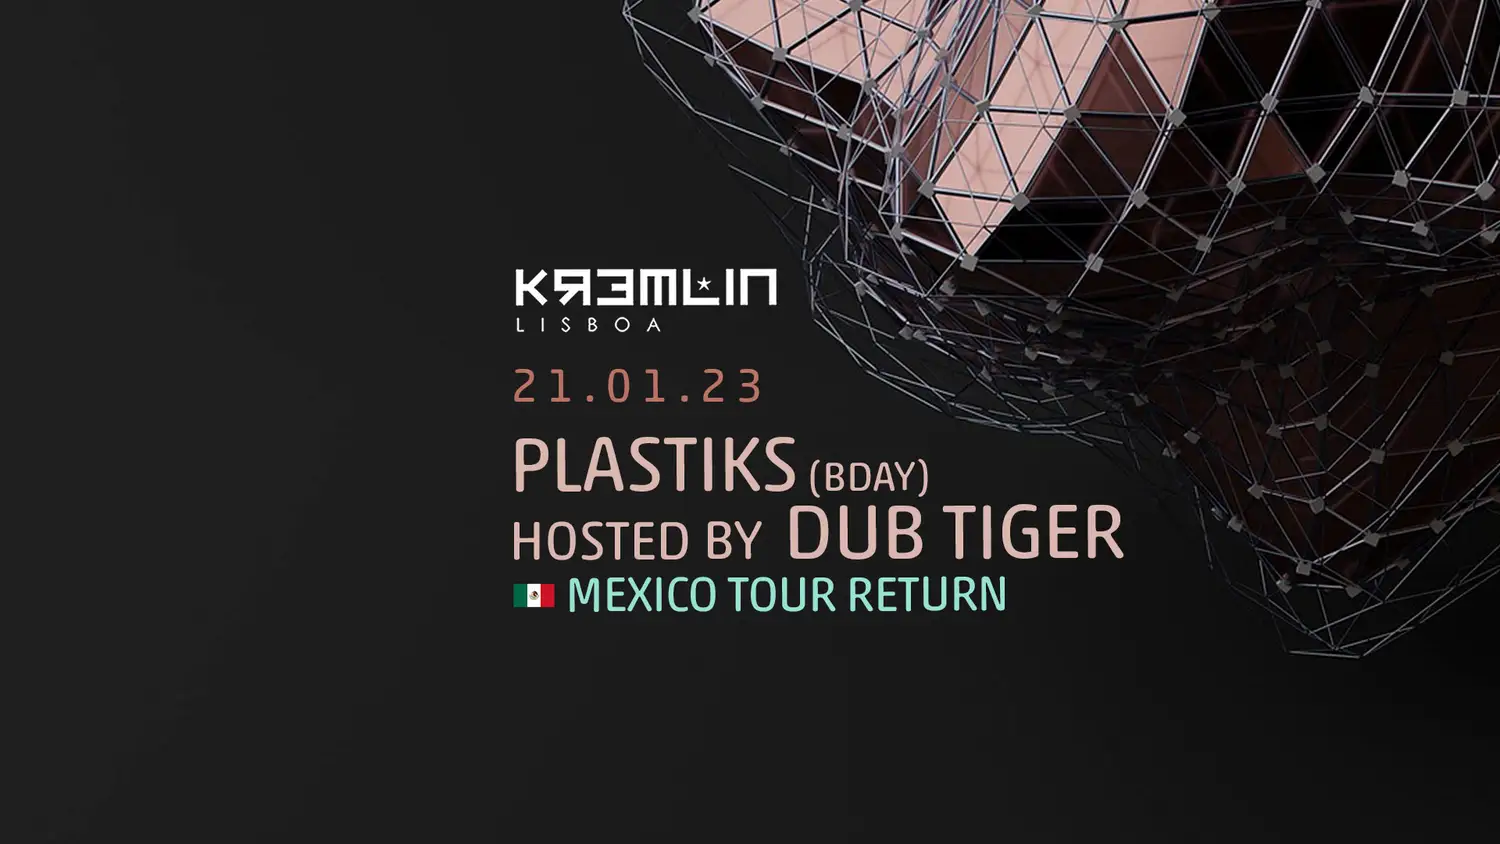 lastiks (Bday) - Hosted by Dub Tiger (Mexico Tour Return)